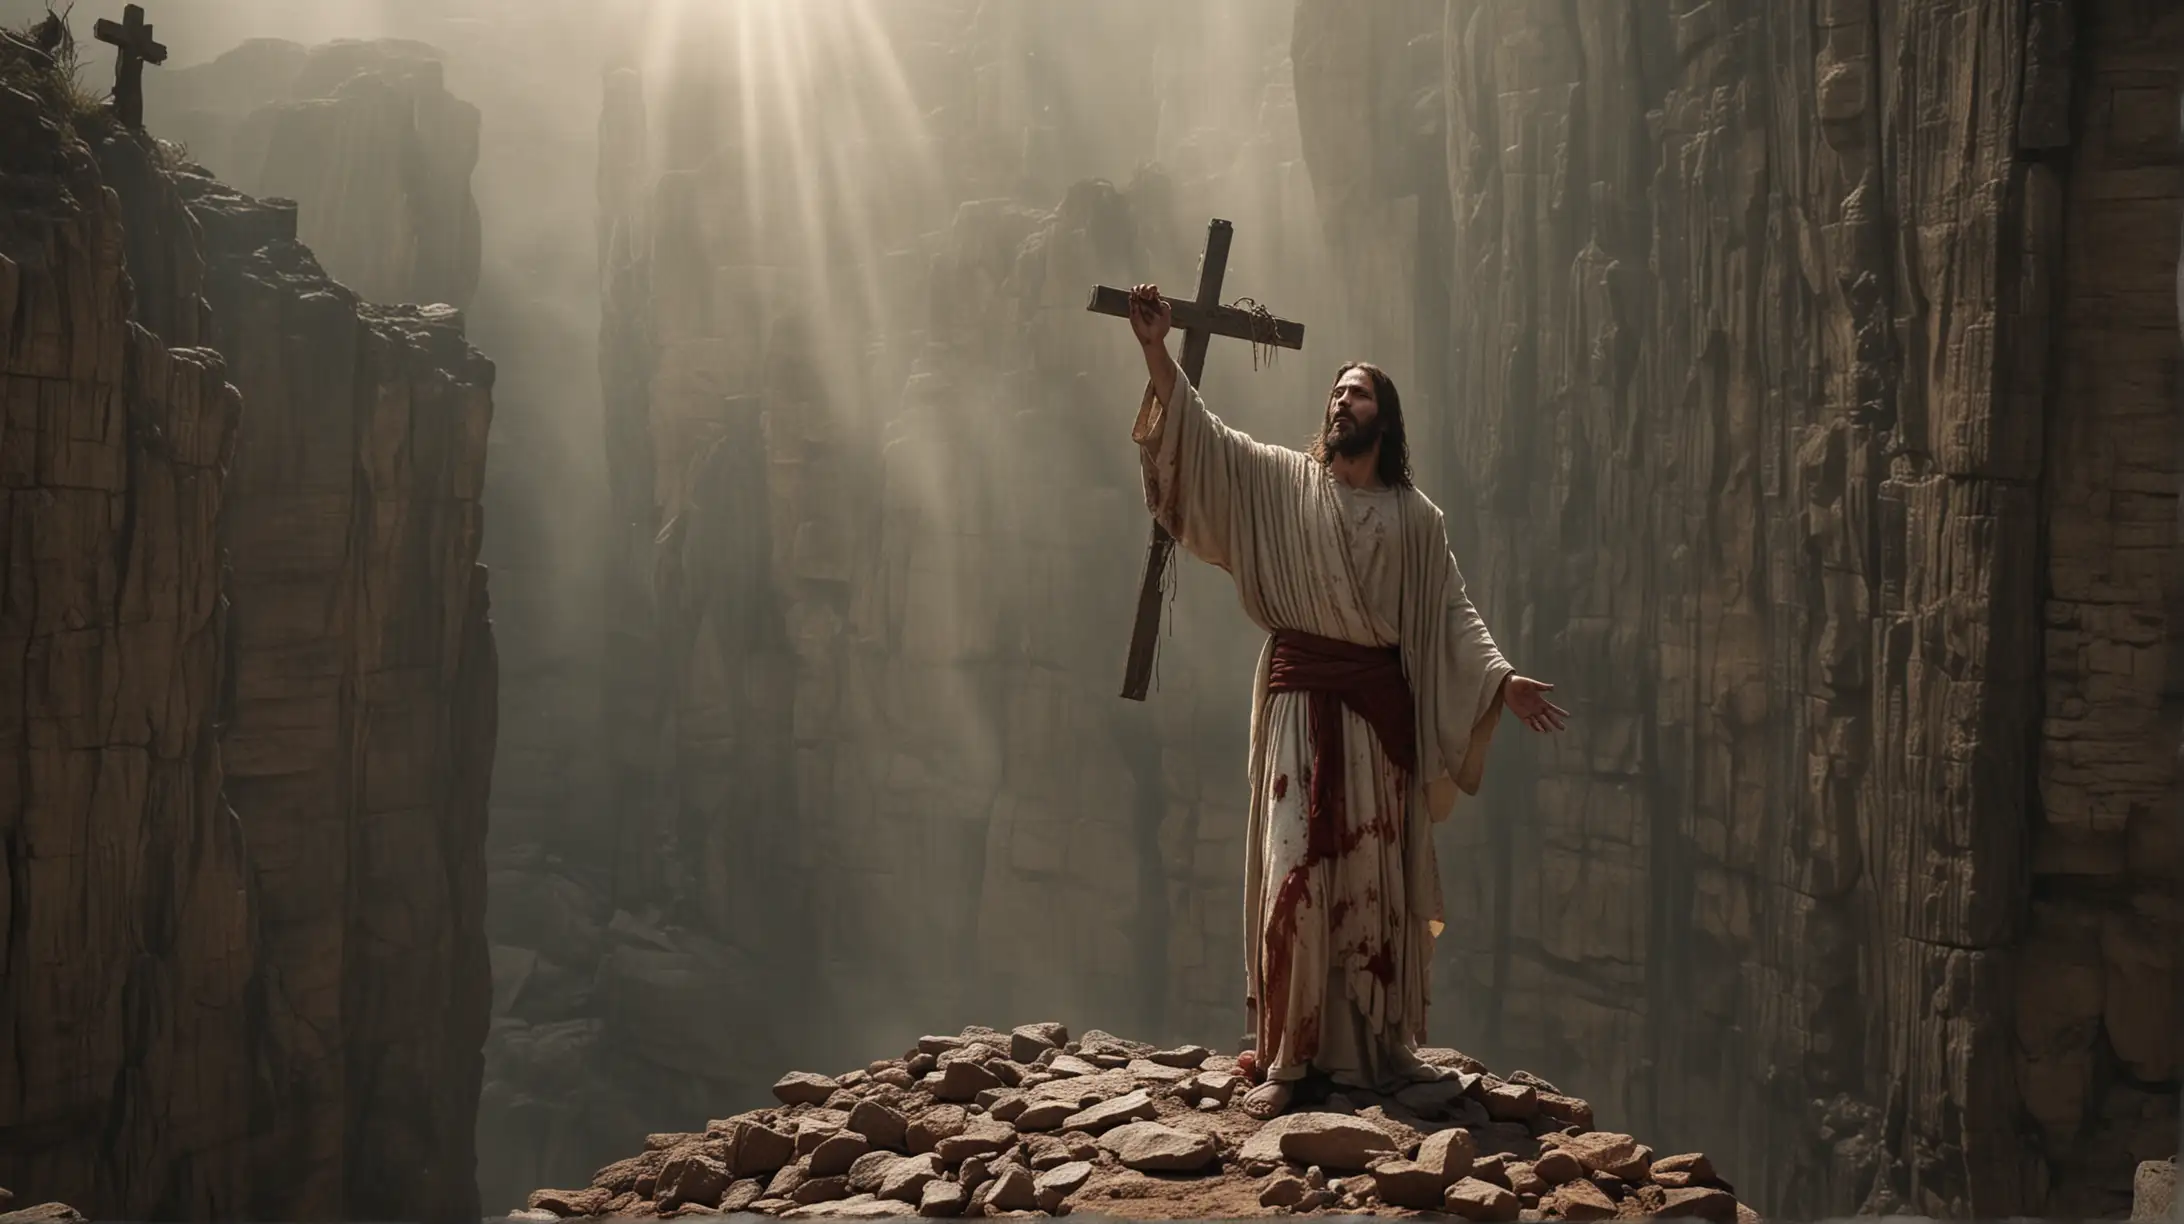 Epic Cinematic Depiction of Jesus Crucifixion with Angelic Backdrop